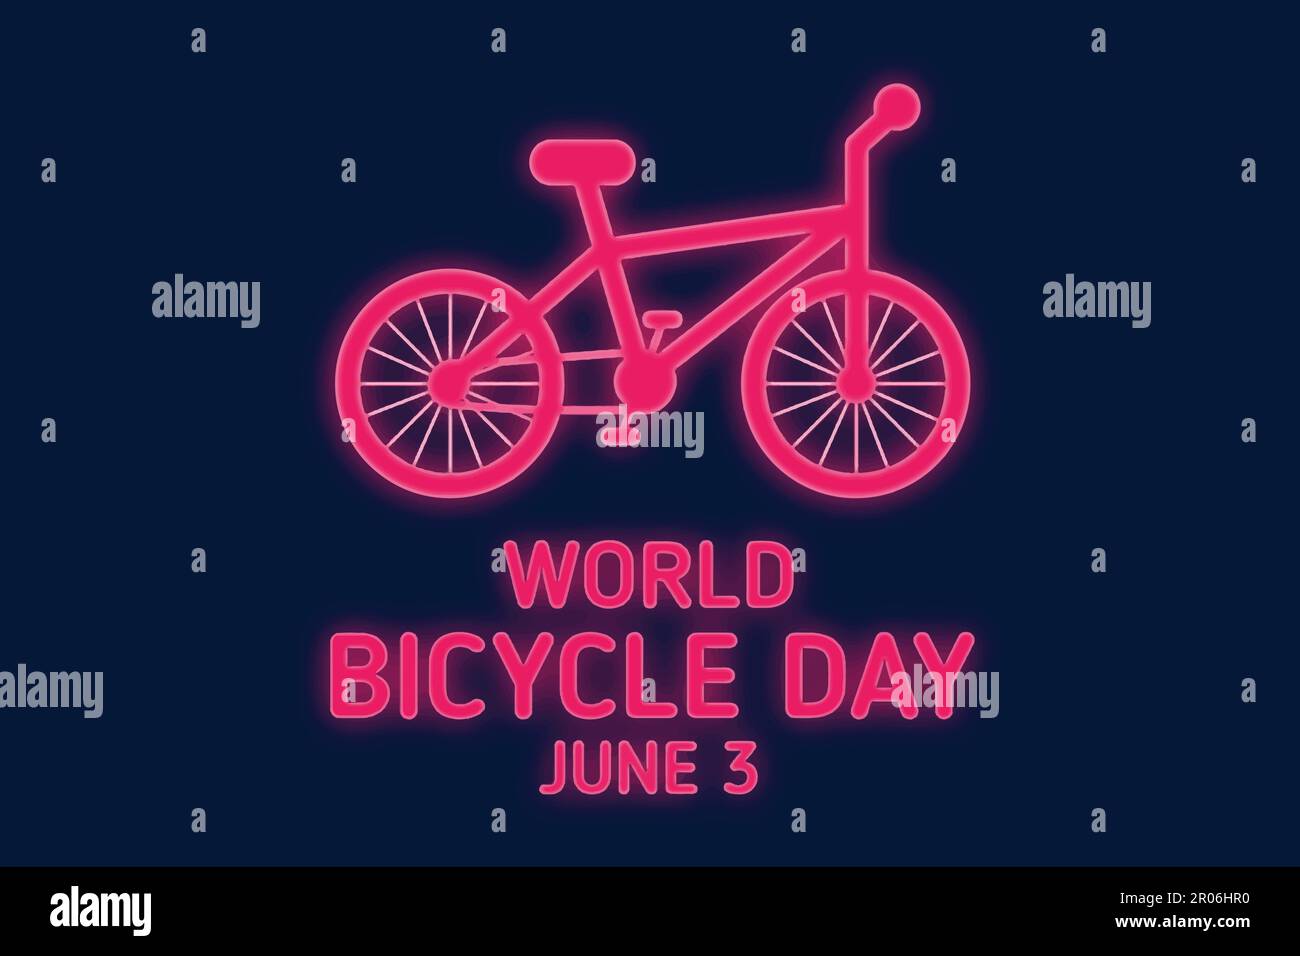 World Bicycle Day Poster with Pink neon bike silhouette . Pink neon